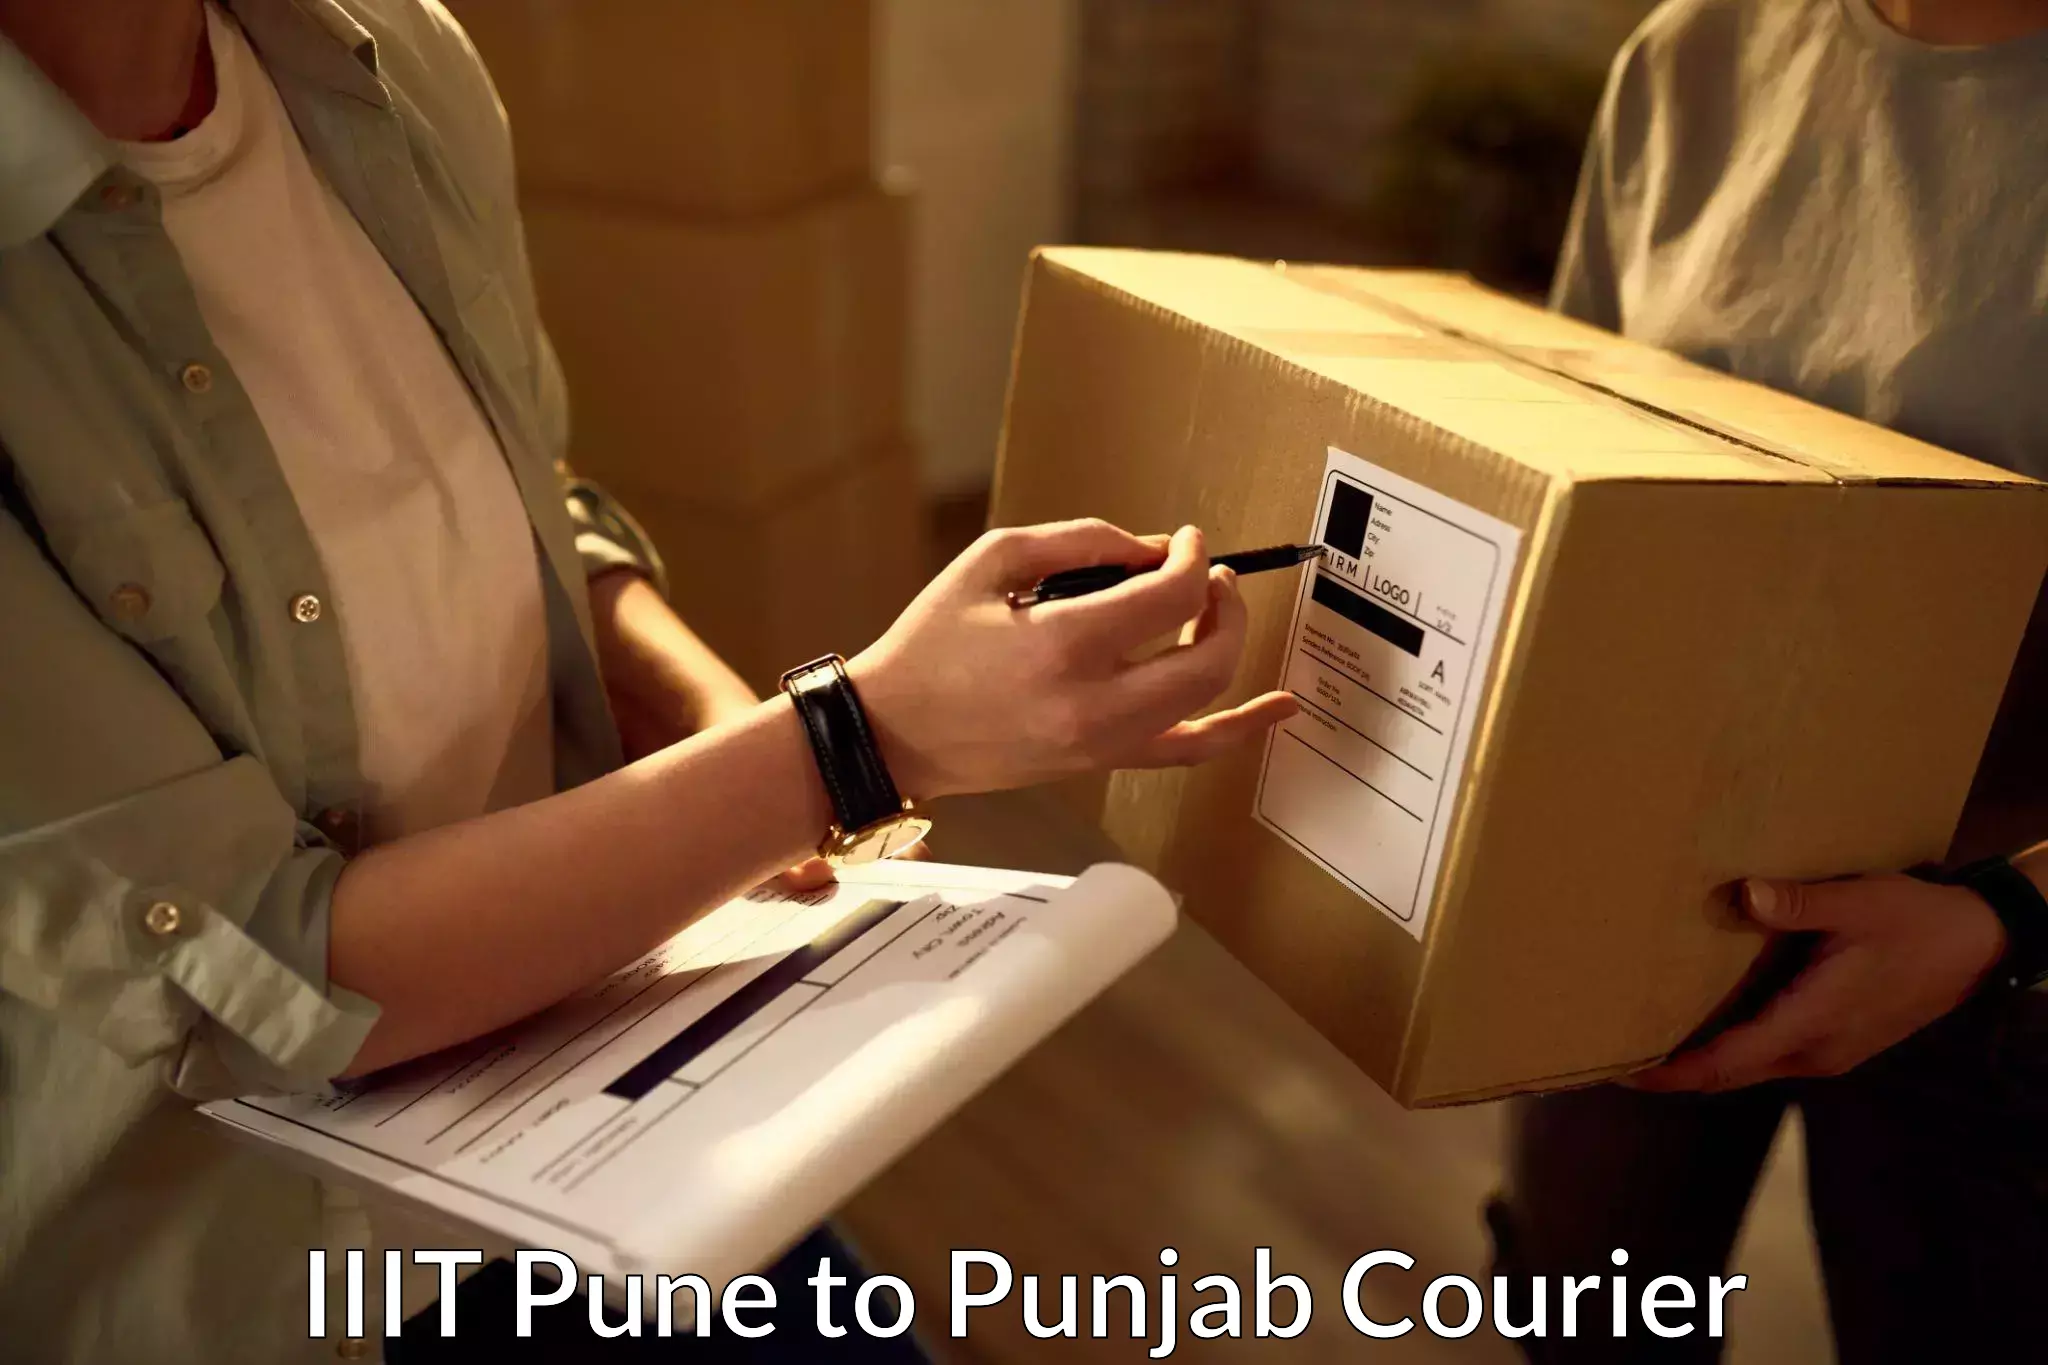 Nationwide courier service IIIT Pune to Ajnala